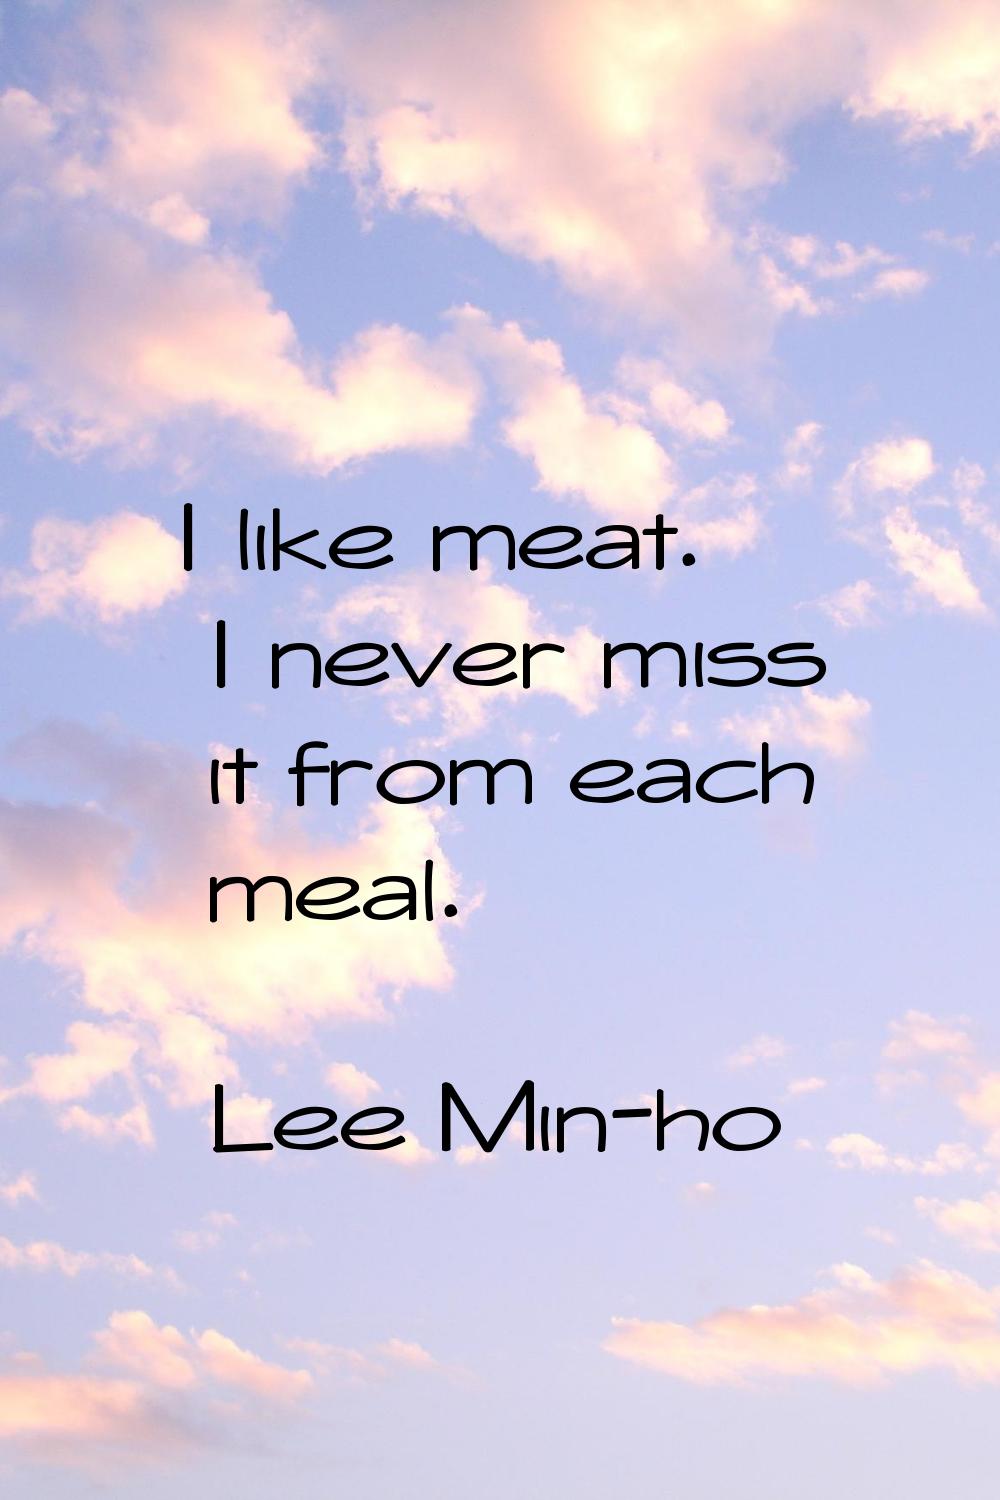 I like meat. I never miss it from each meal.